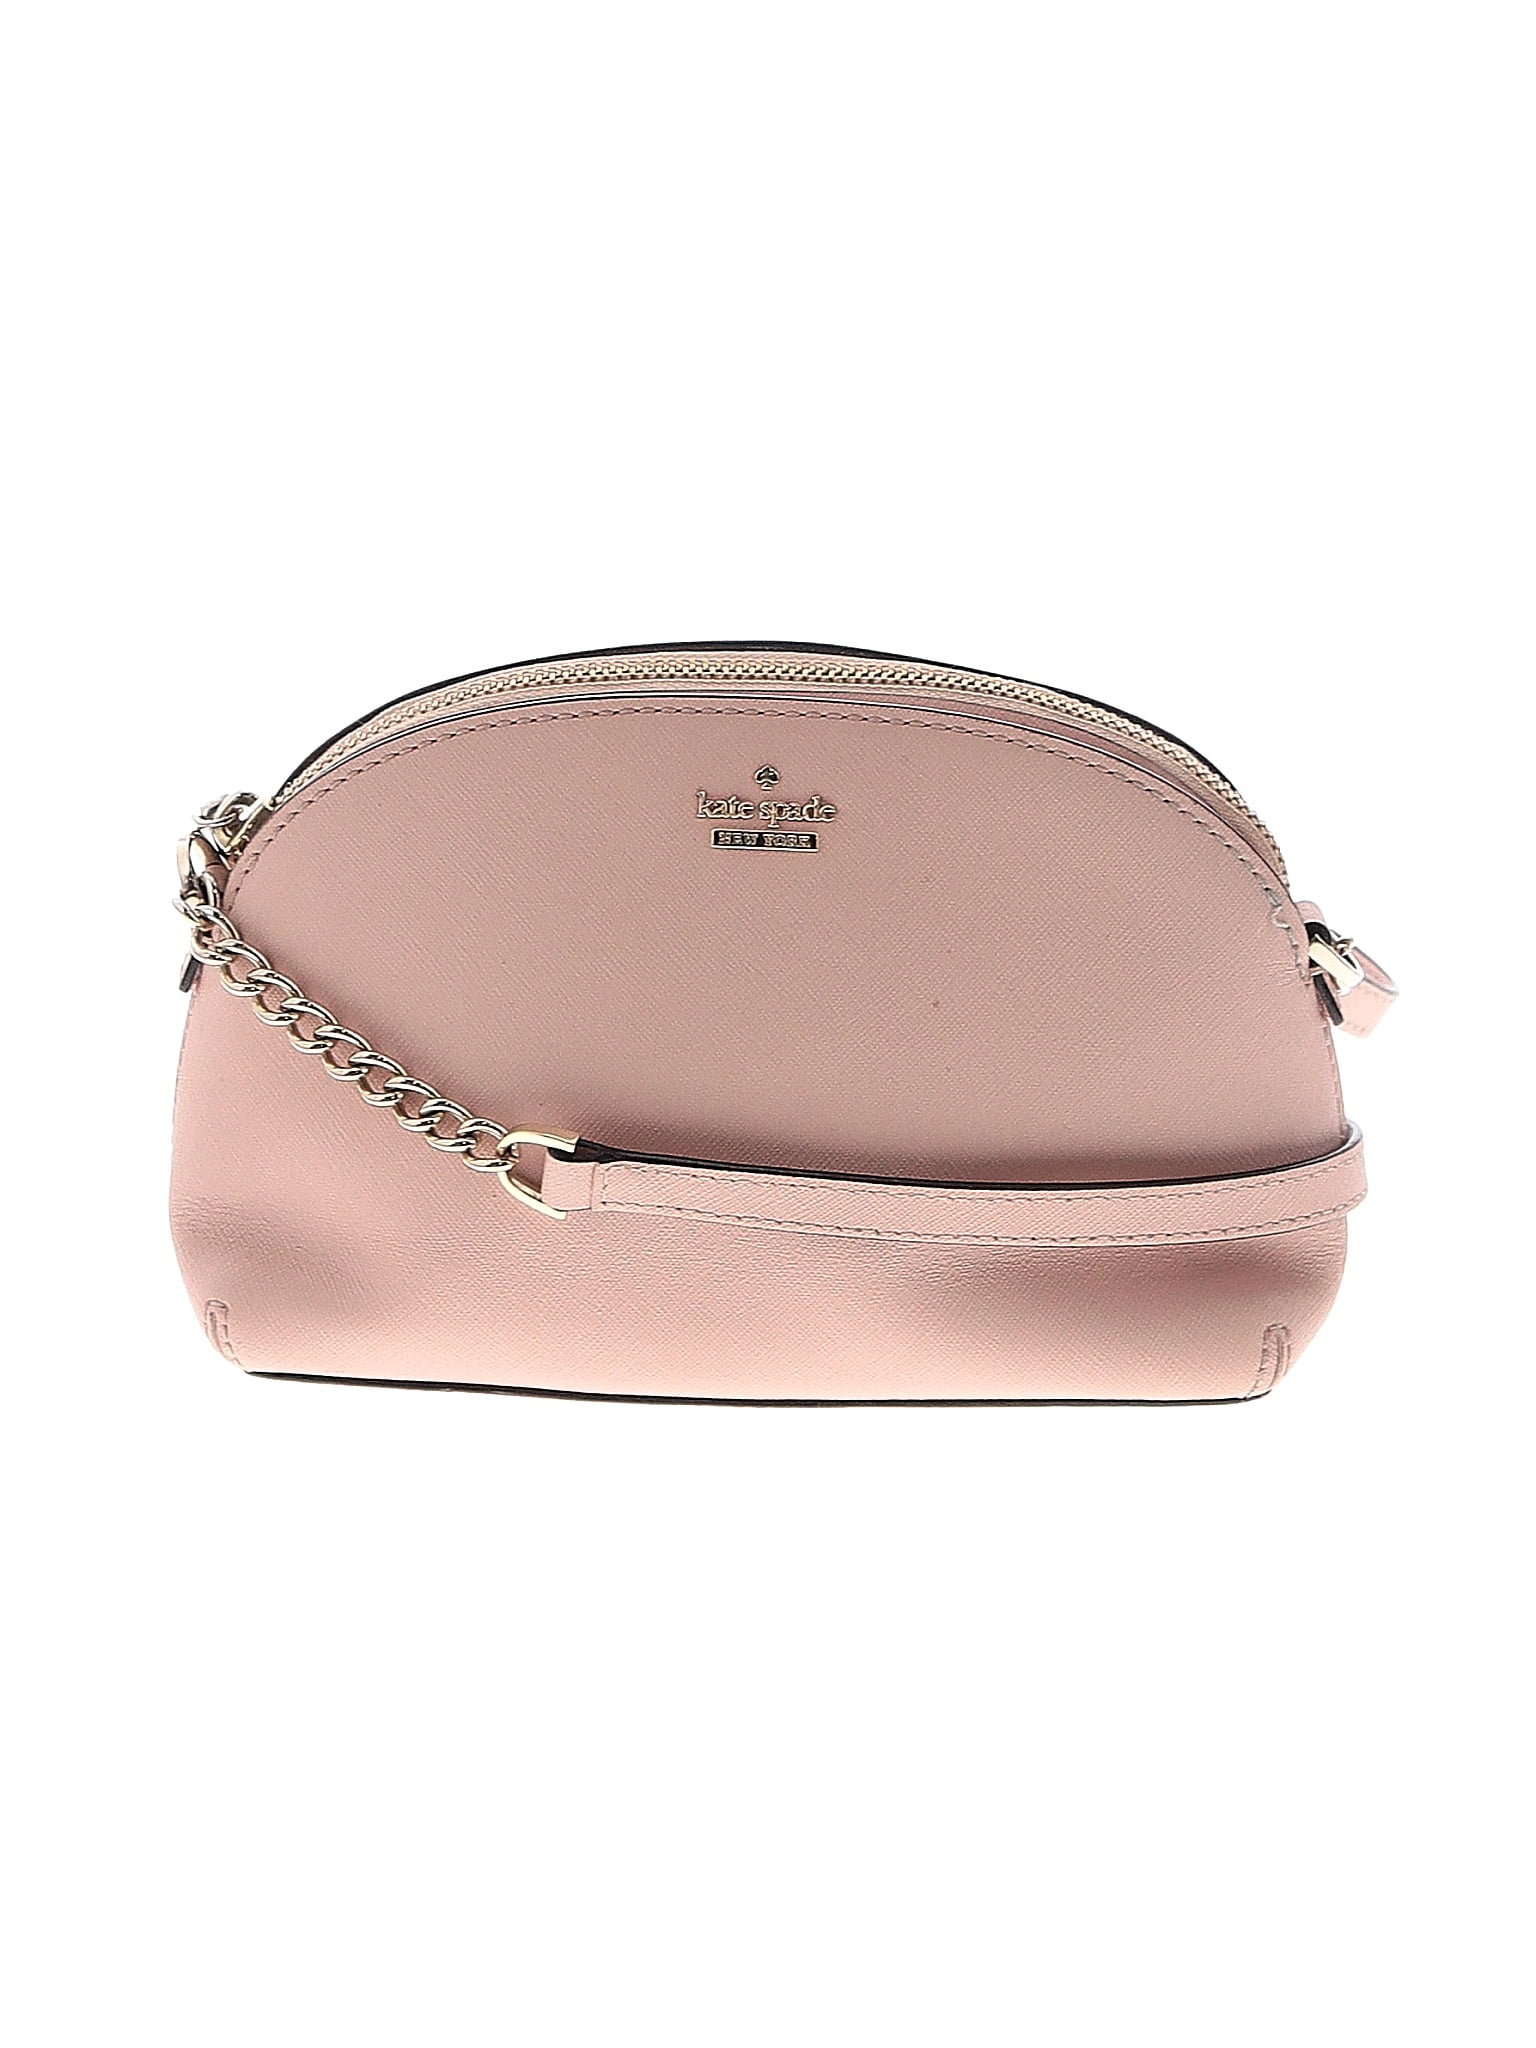 Kate Spade New York 100% Leather Solid Blush Pink Leather